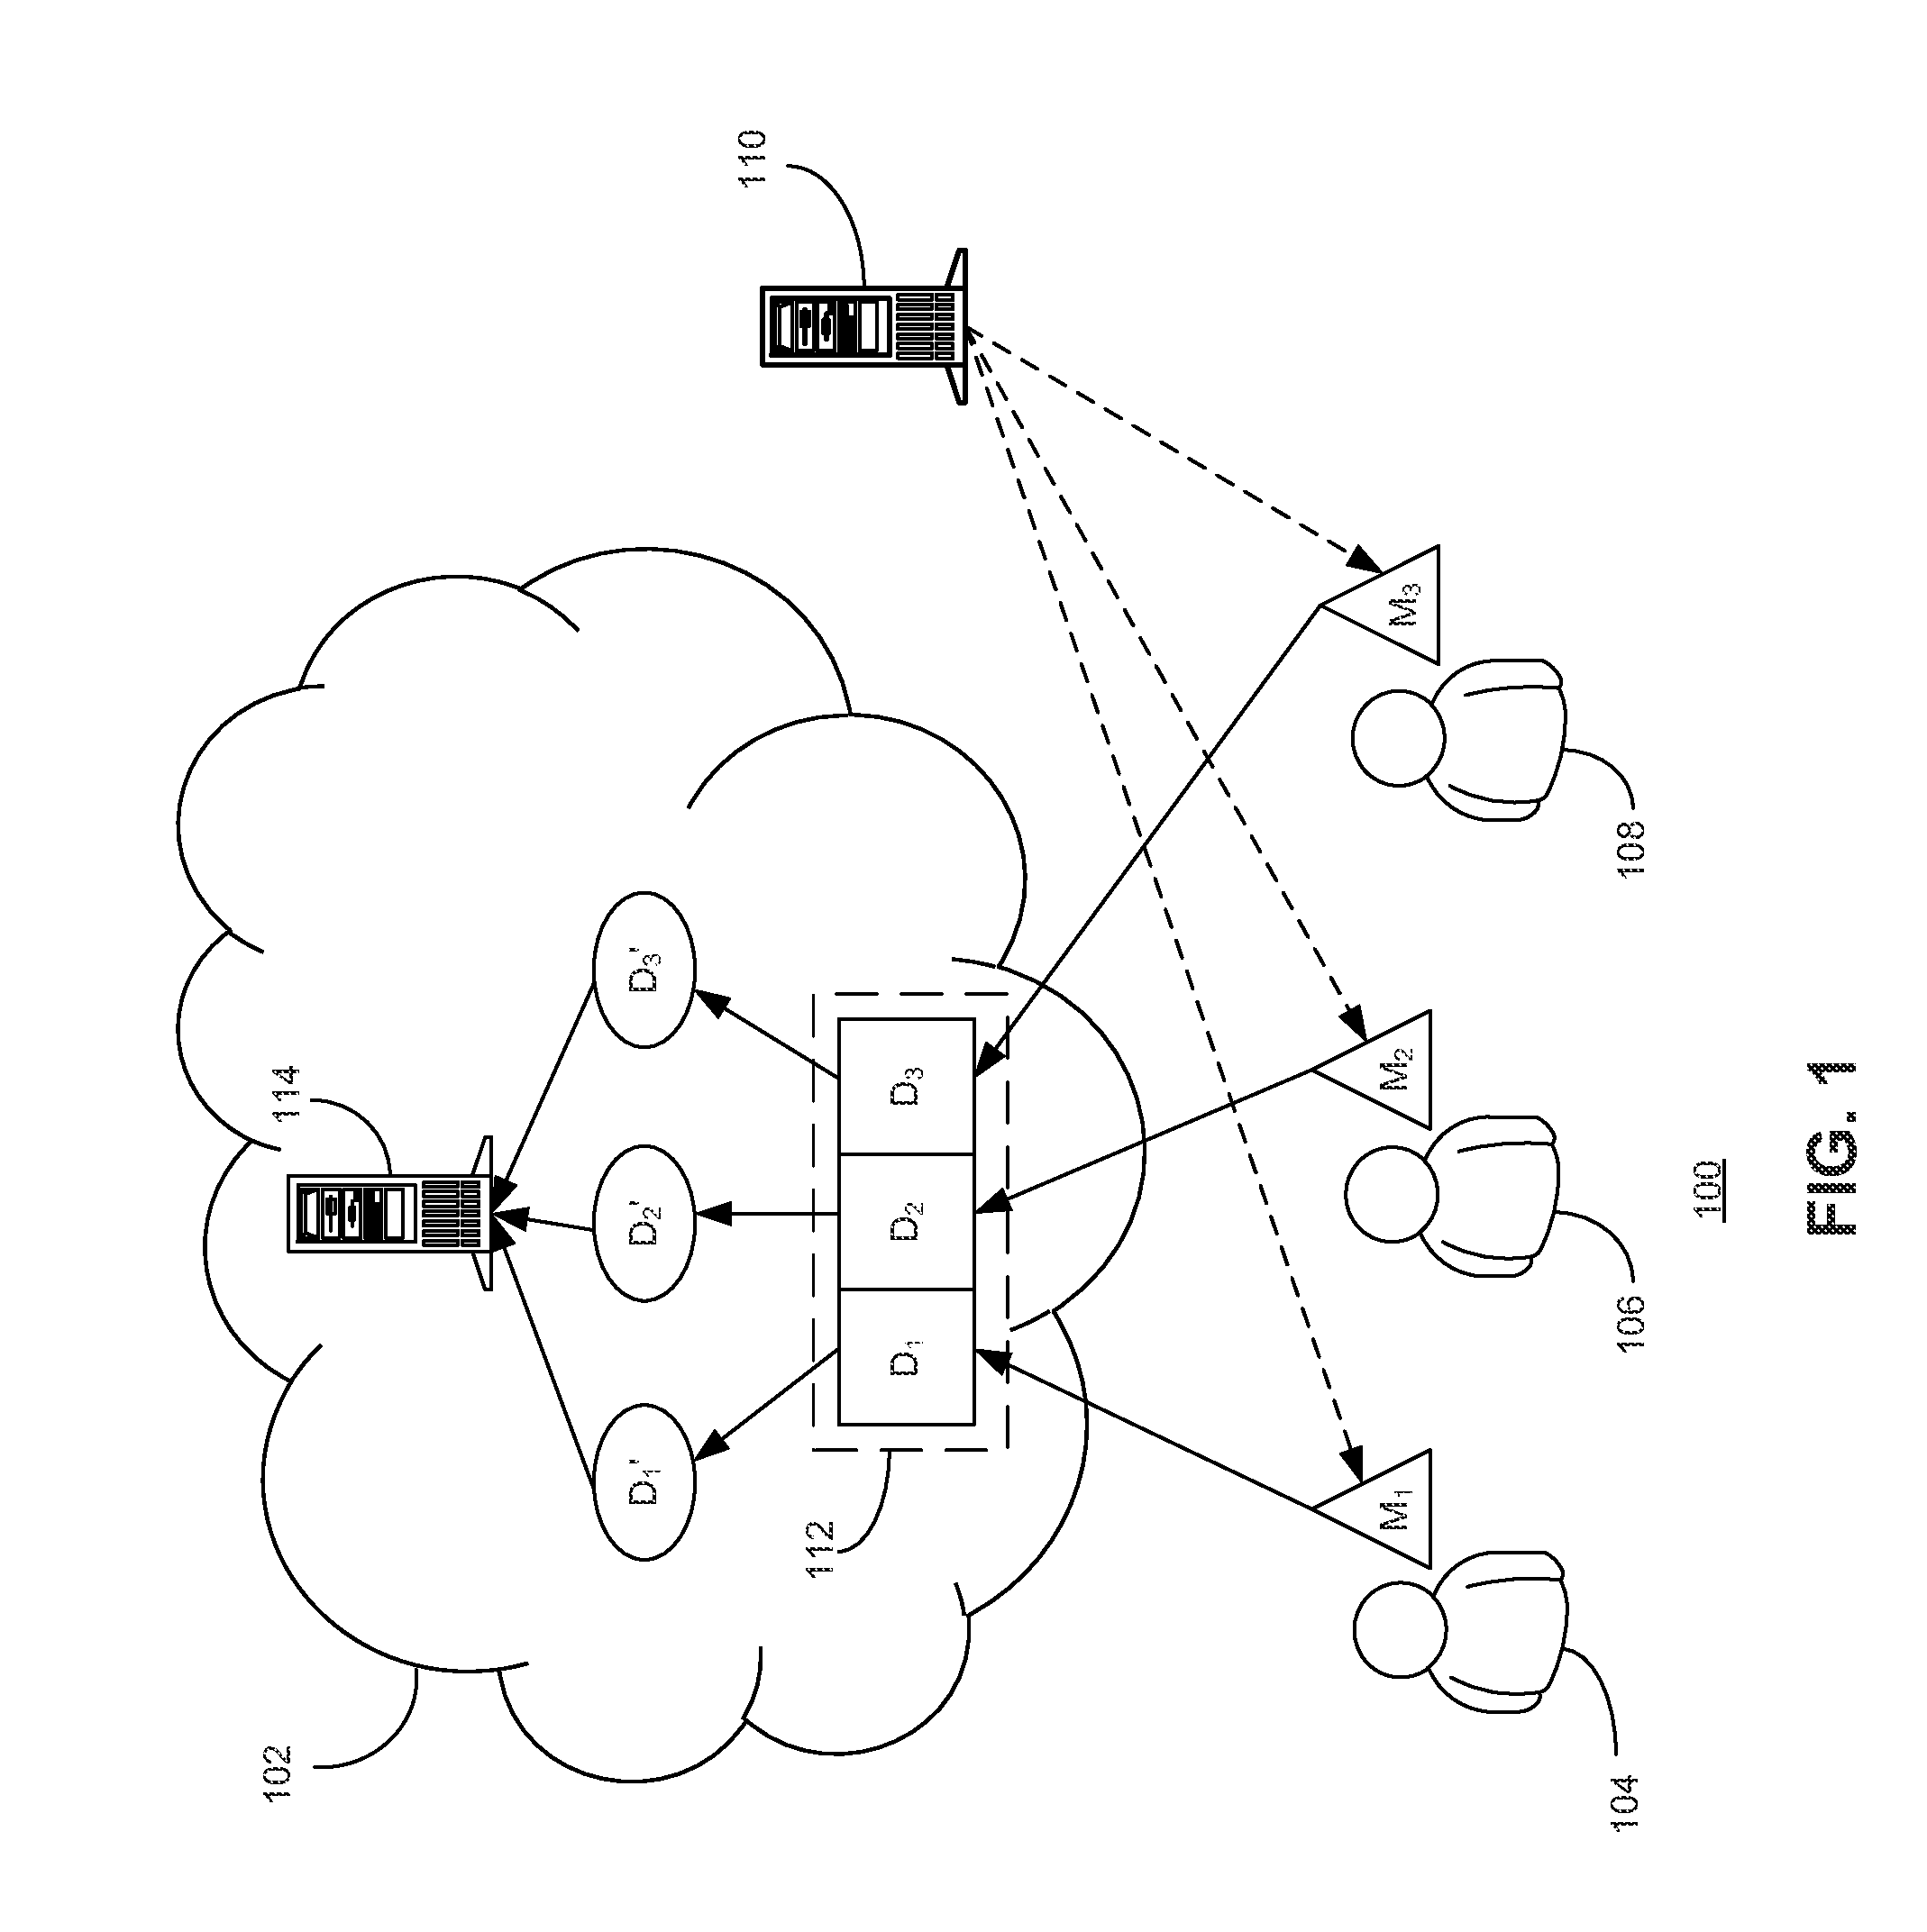 Method and system for secure multiparty cloud computation